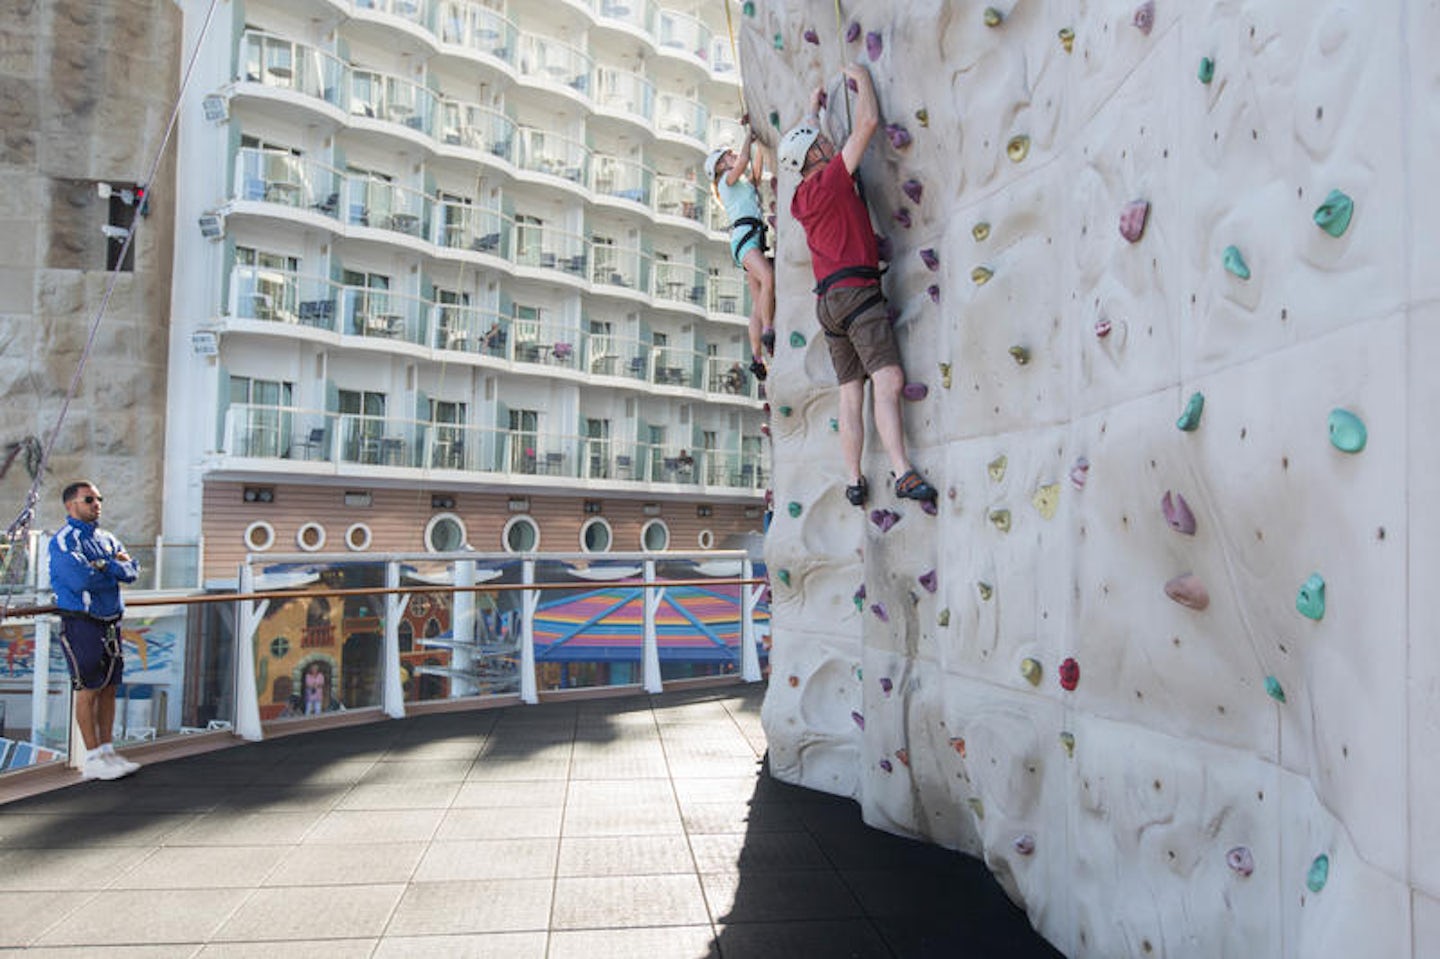 Rock Climbing Wall on Allure of the Seas